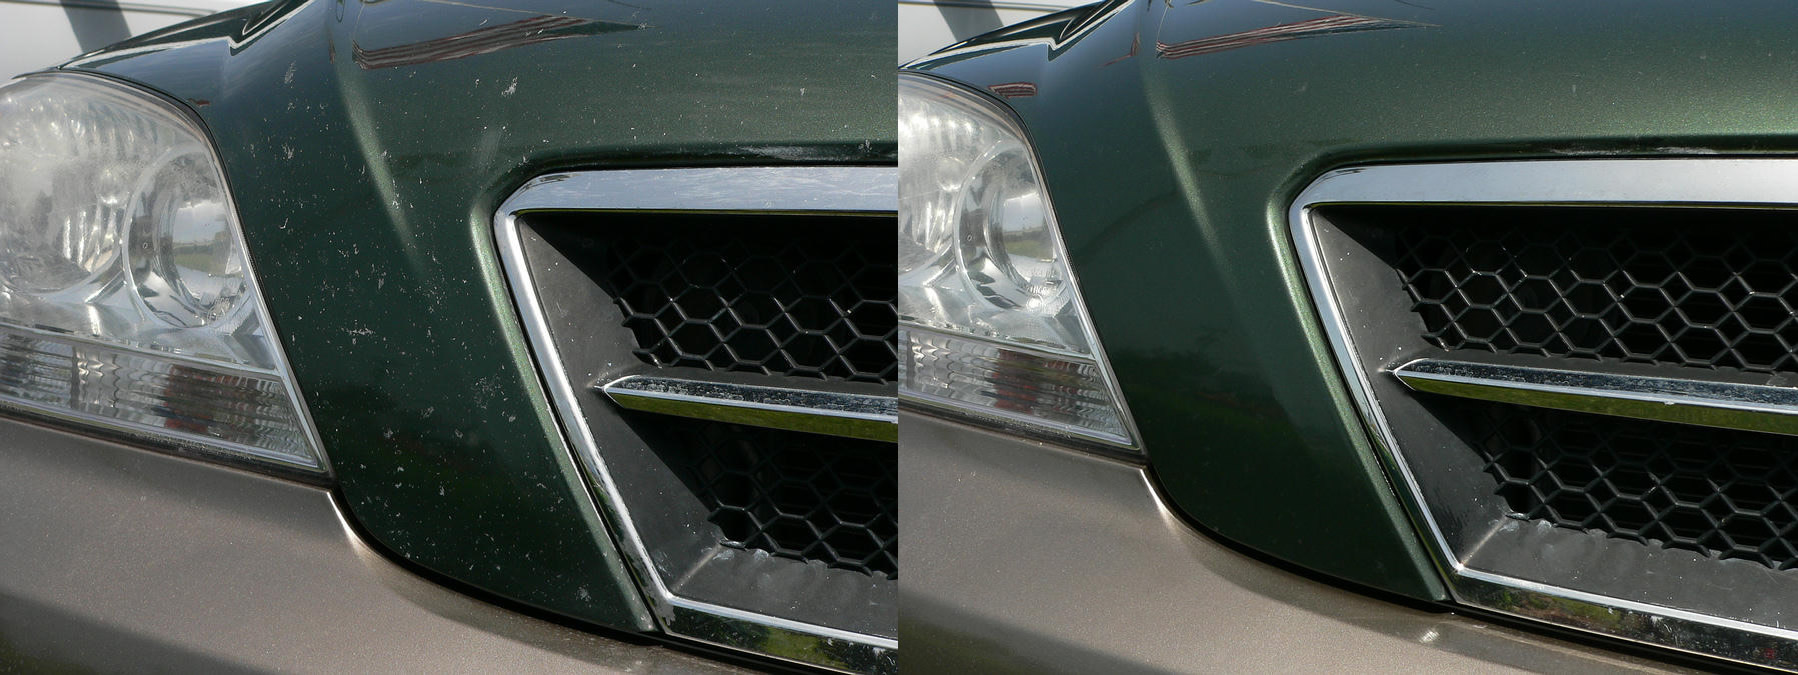 Before and after pictures of a car's front grille showcasing paint touch-up.